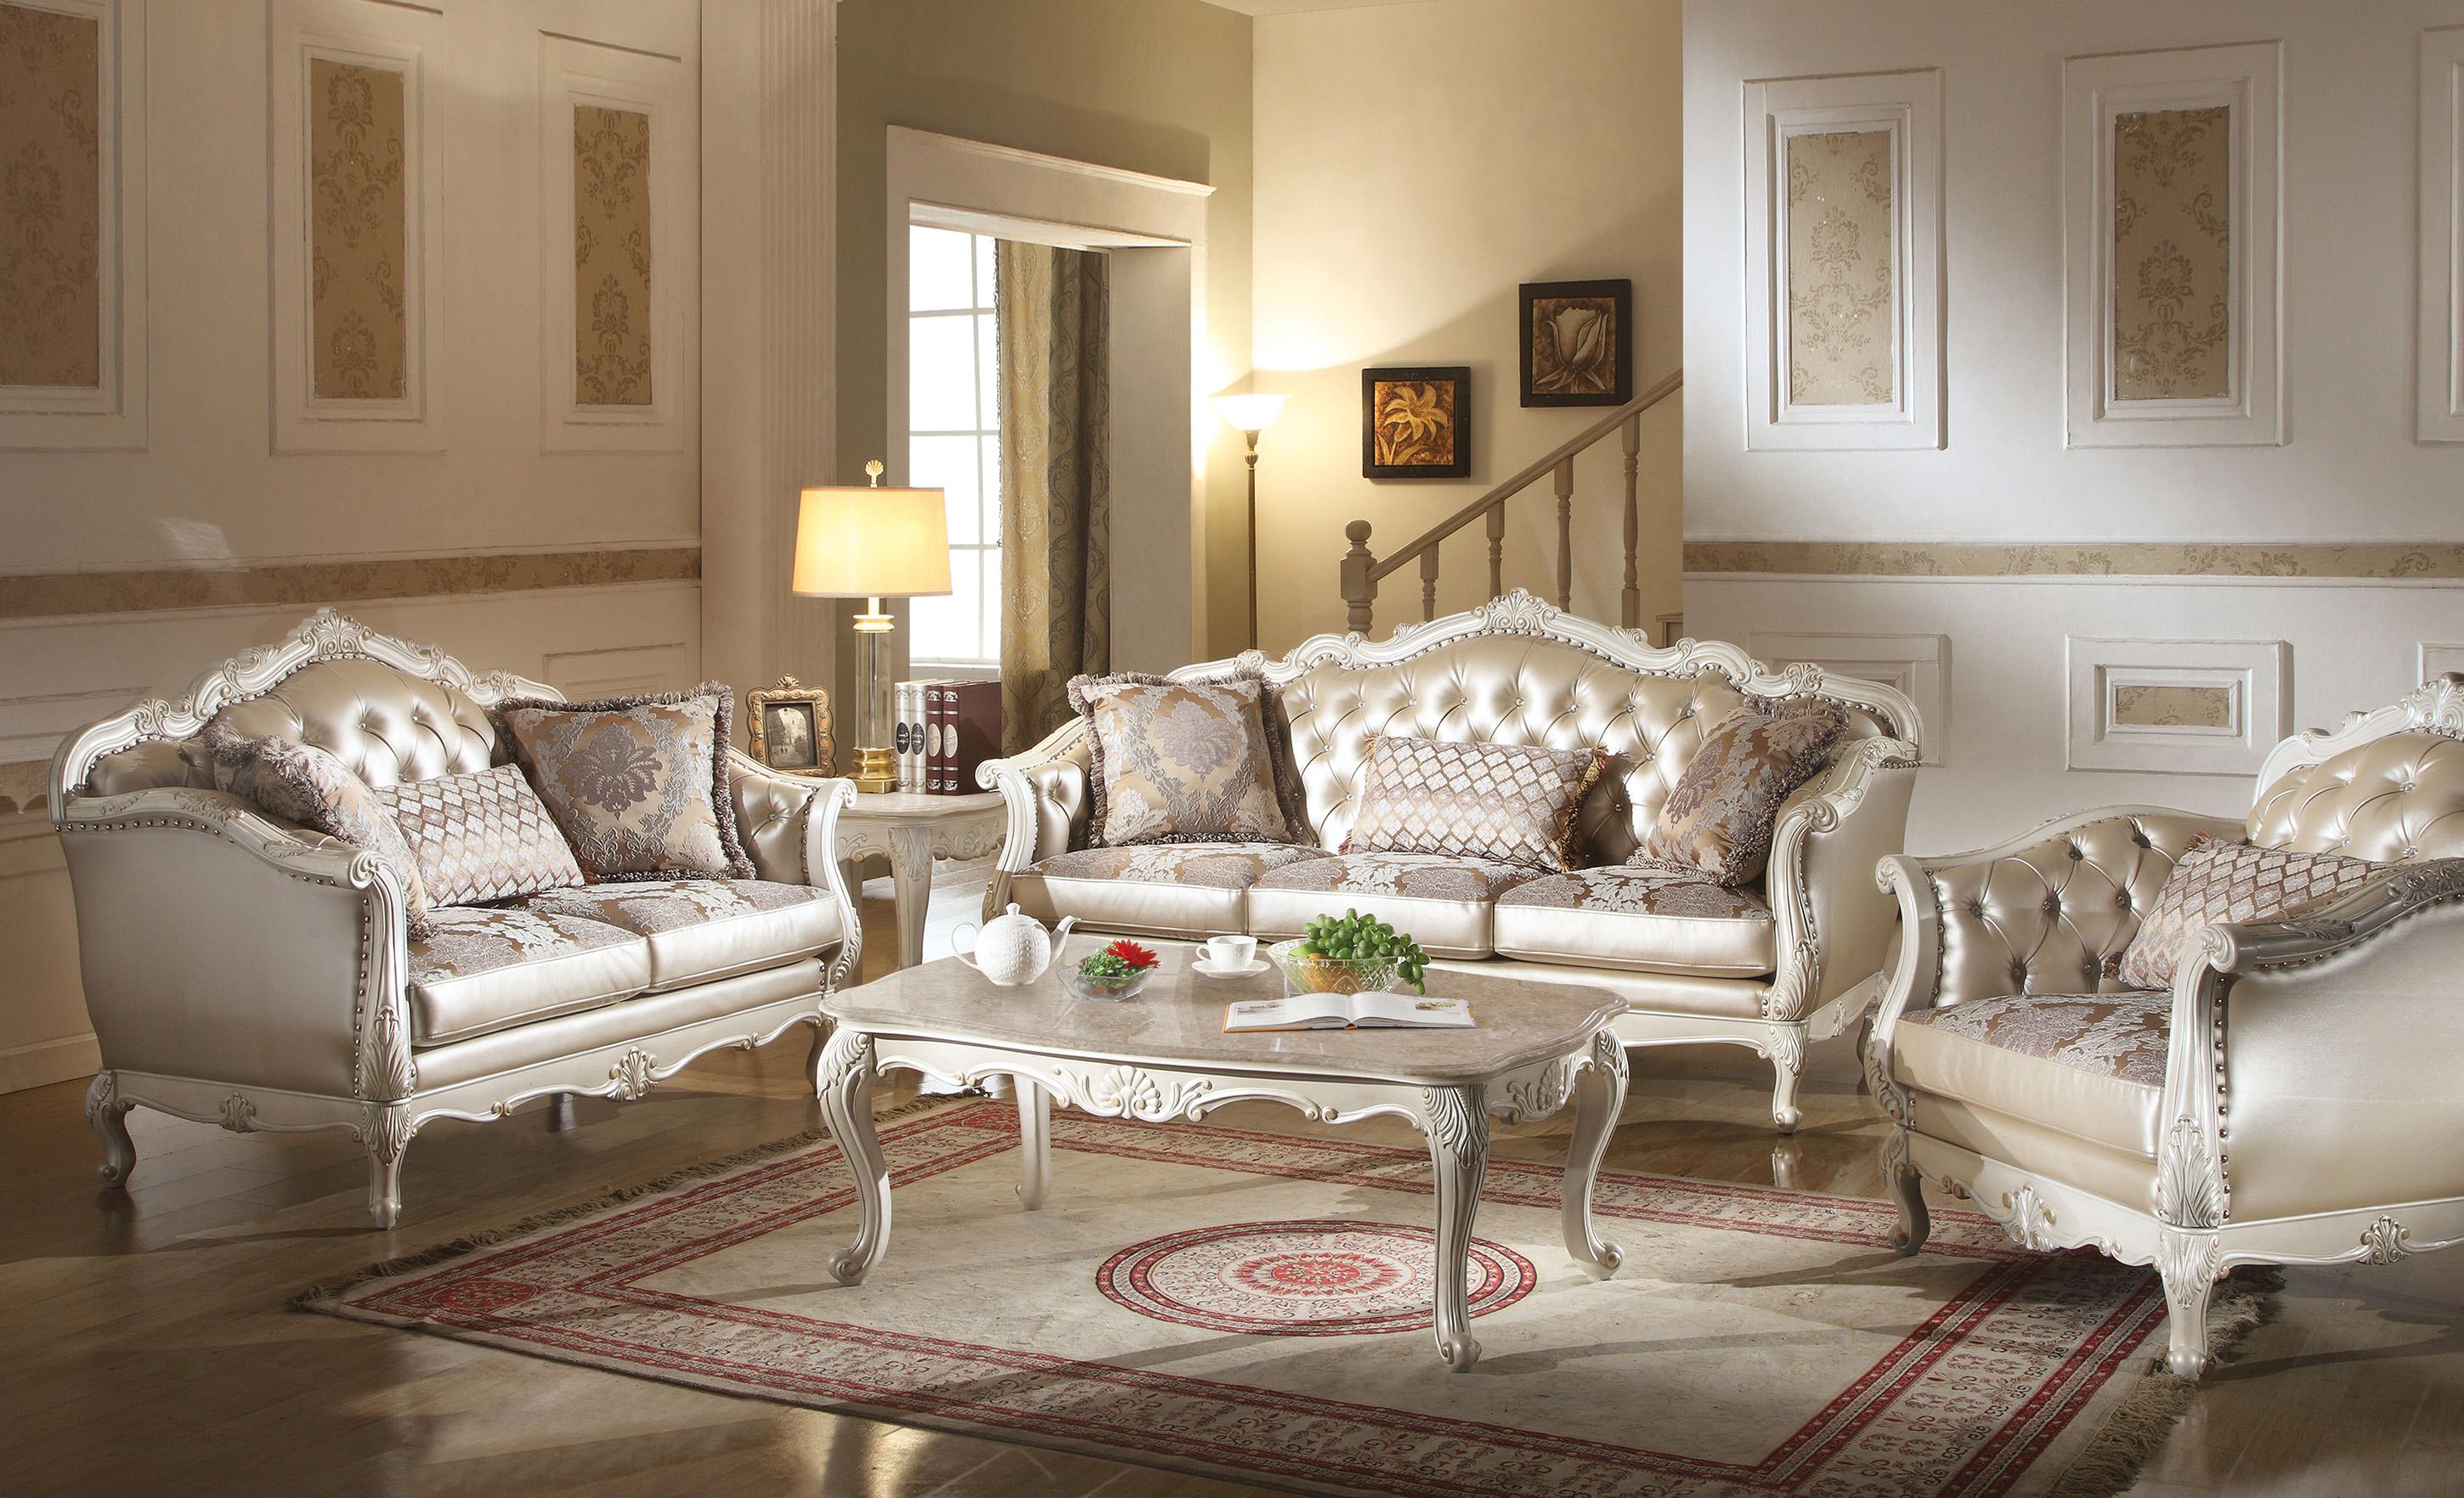 

    
Rose Gold and Pearl White Living Room Set 3Pcs Acme Furniture 53540 Chantelle
